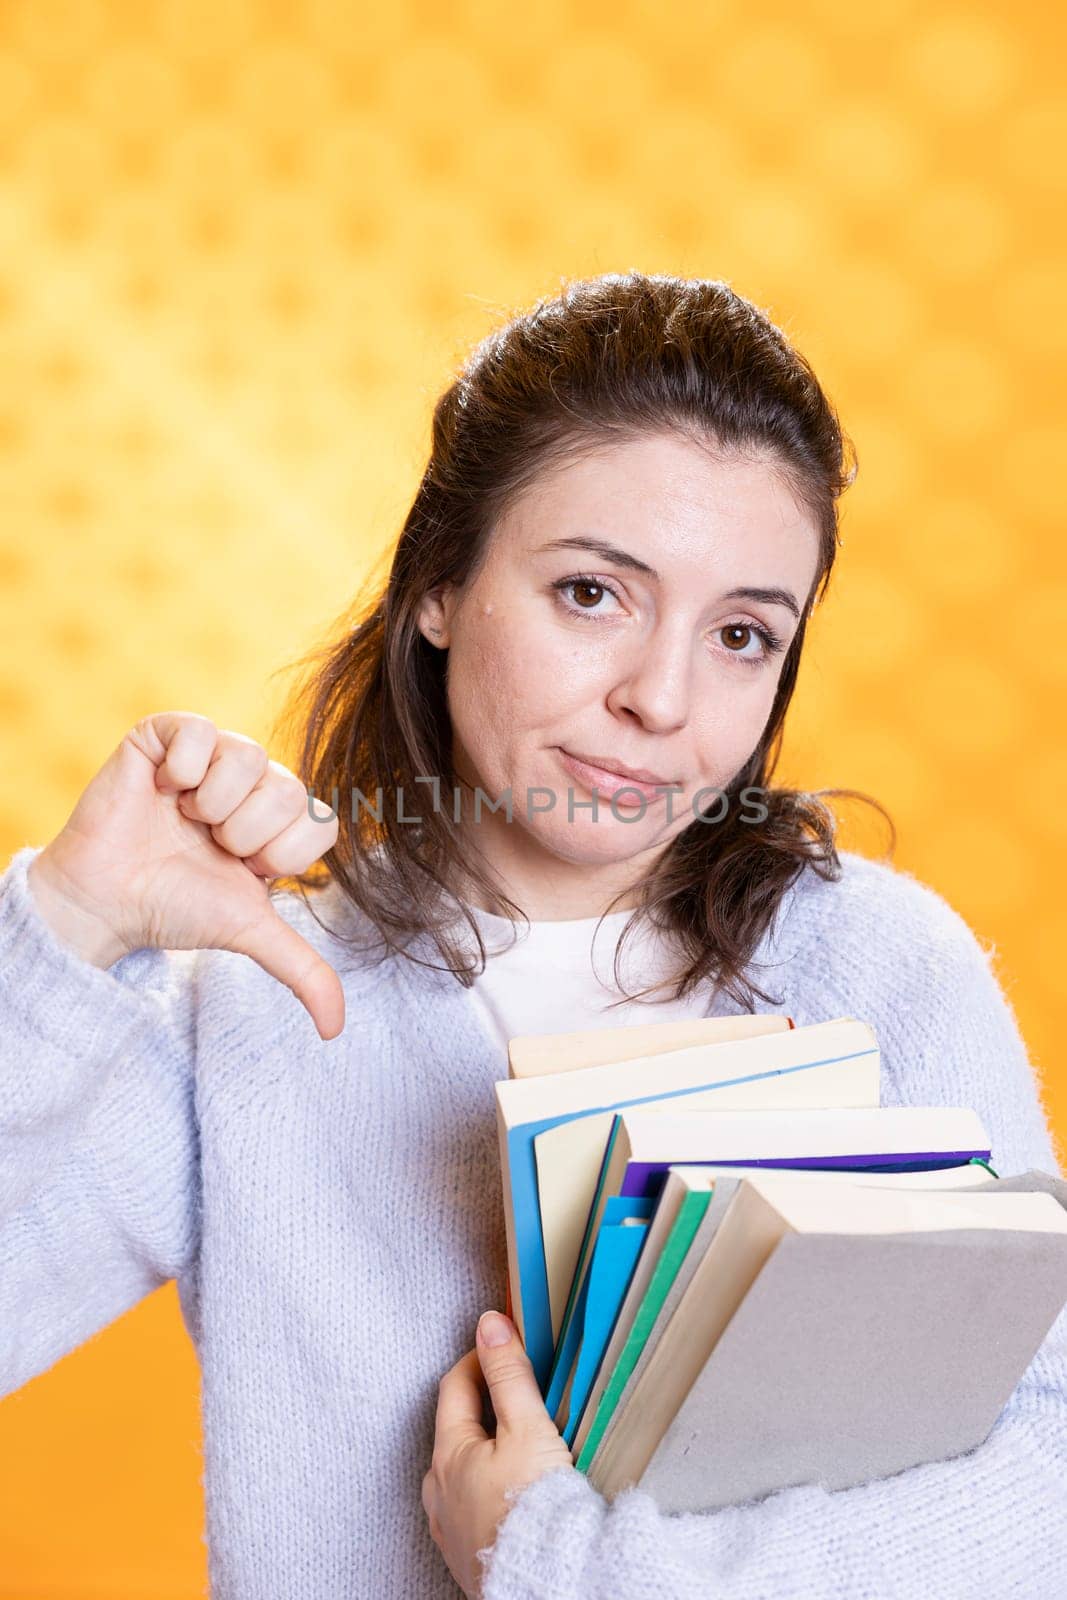 Portrait of woman with stack of books doing thumbs down sign, studio background by DCStudio